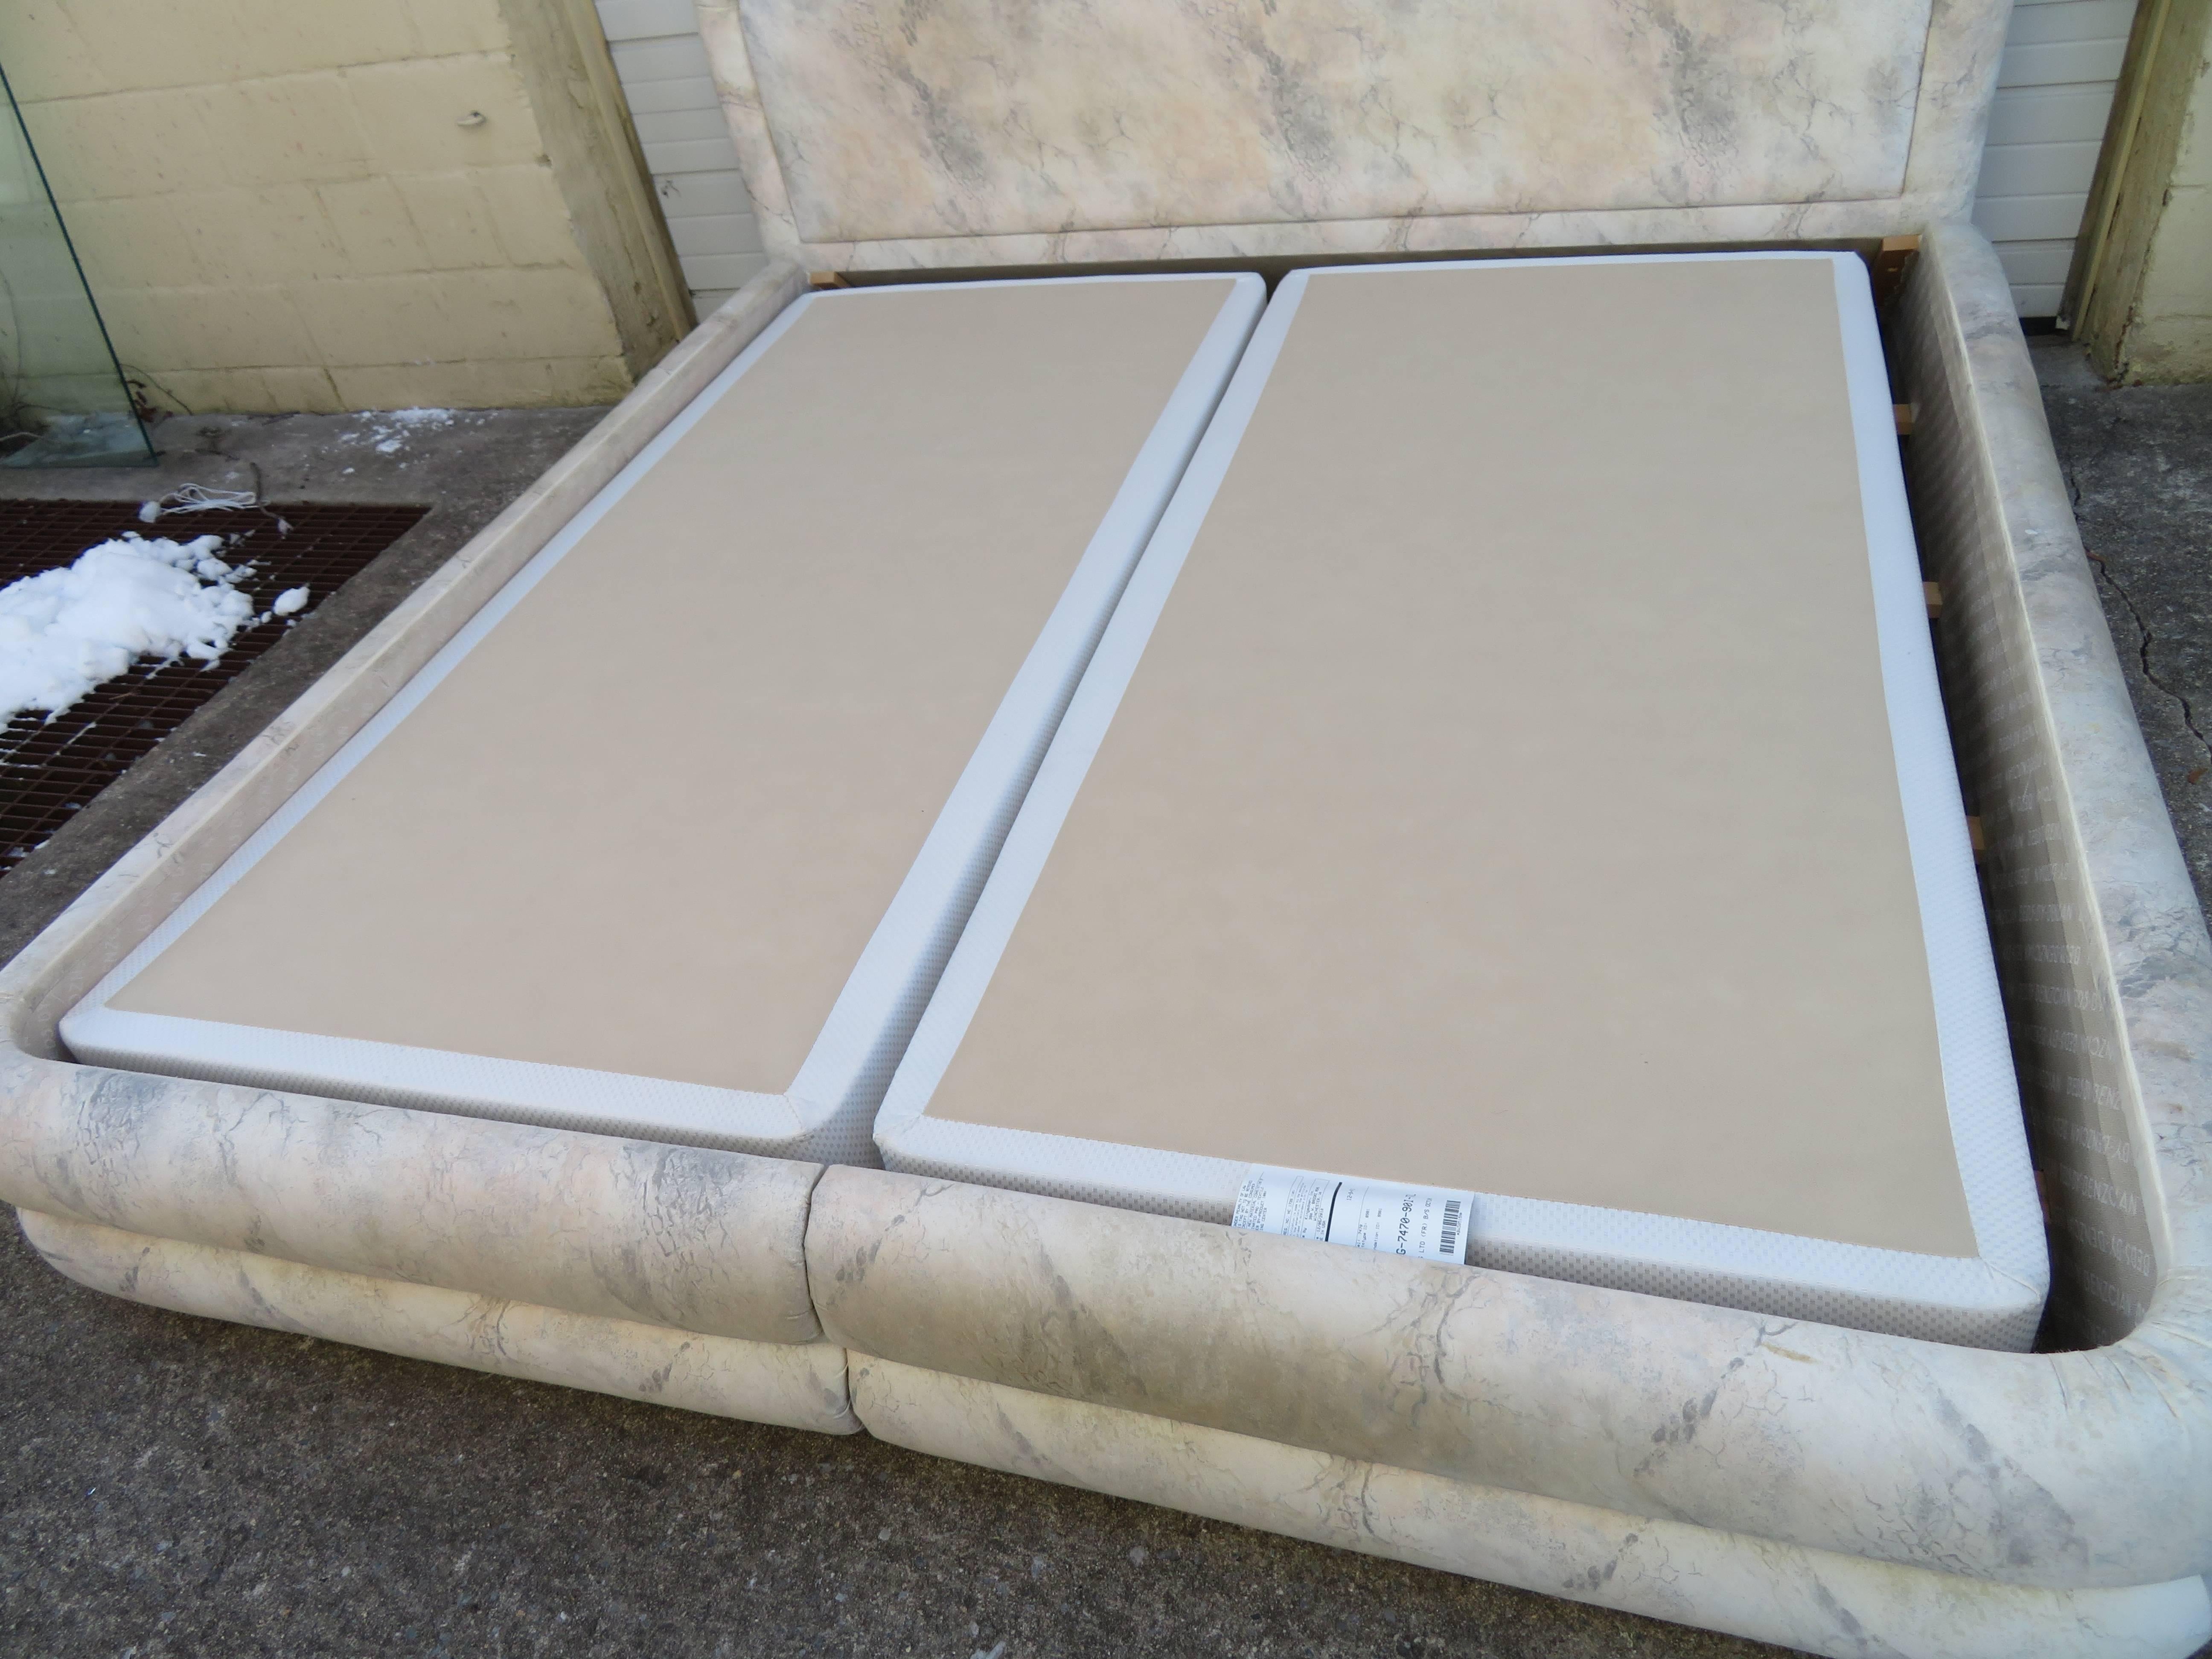 Nice vintage modern Steve Chase style upholstered king-size bed. This is a perfect candidate for re-upholstery as the original fabric is dated. Bed measures 40